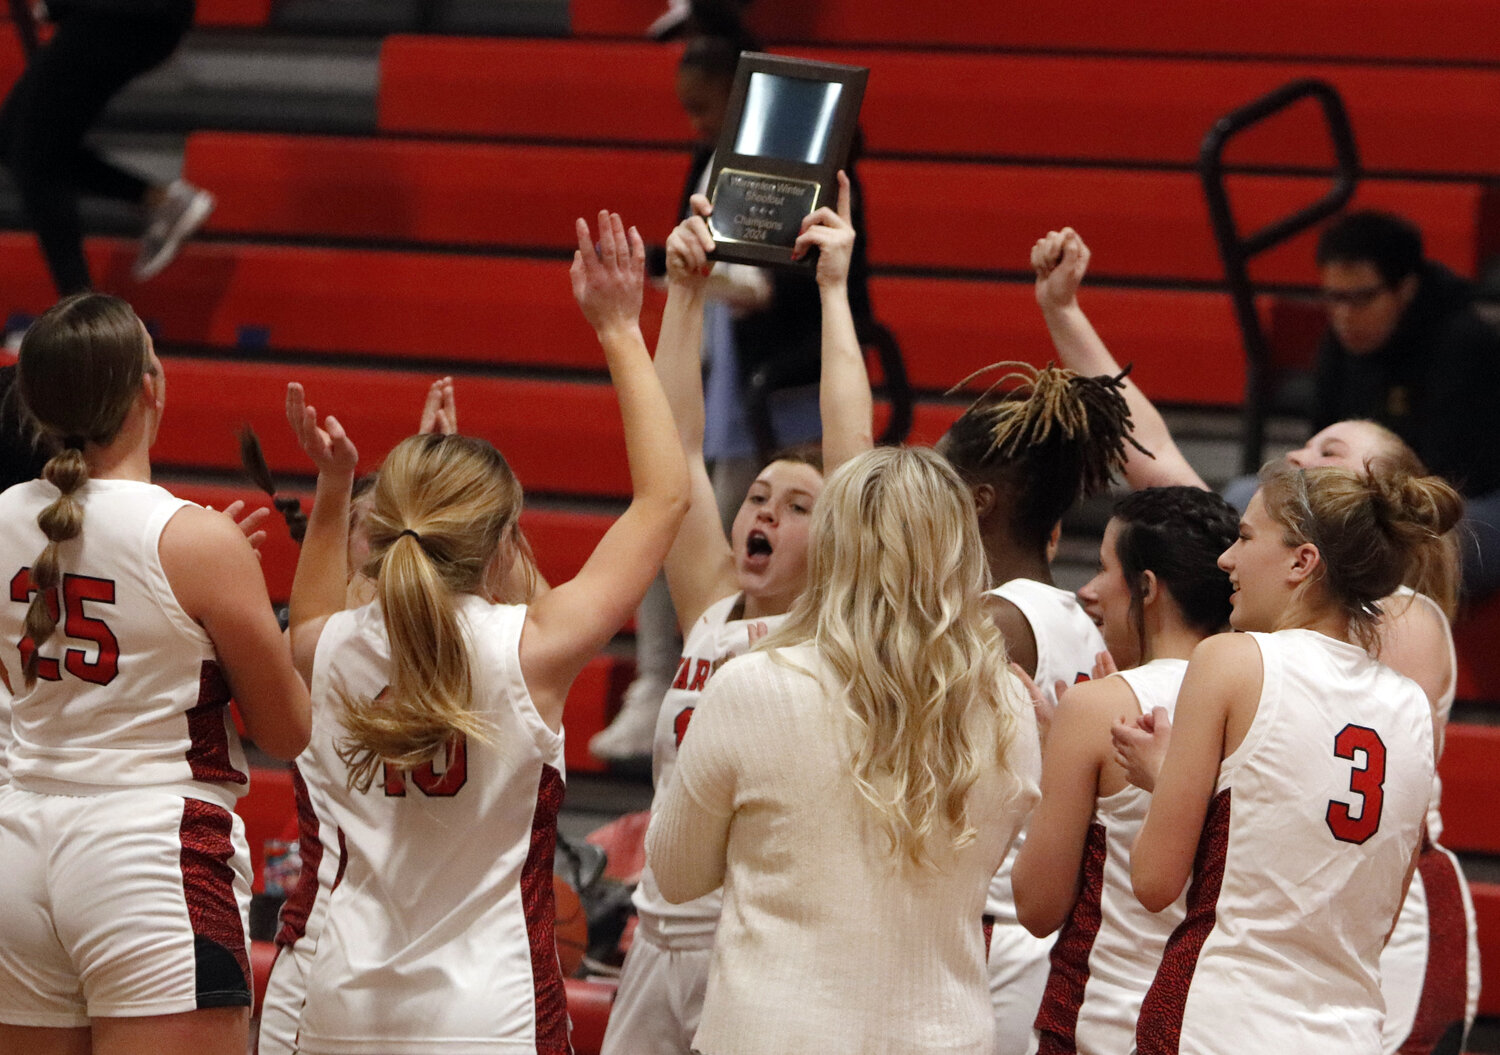 Warrenton celebrates after receiving the first place plaque after winning the Warrenton Winter Classic last week.